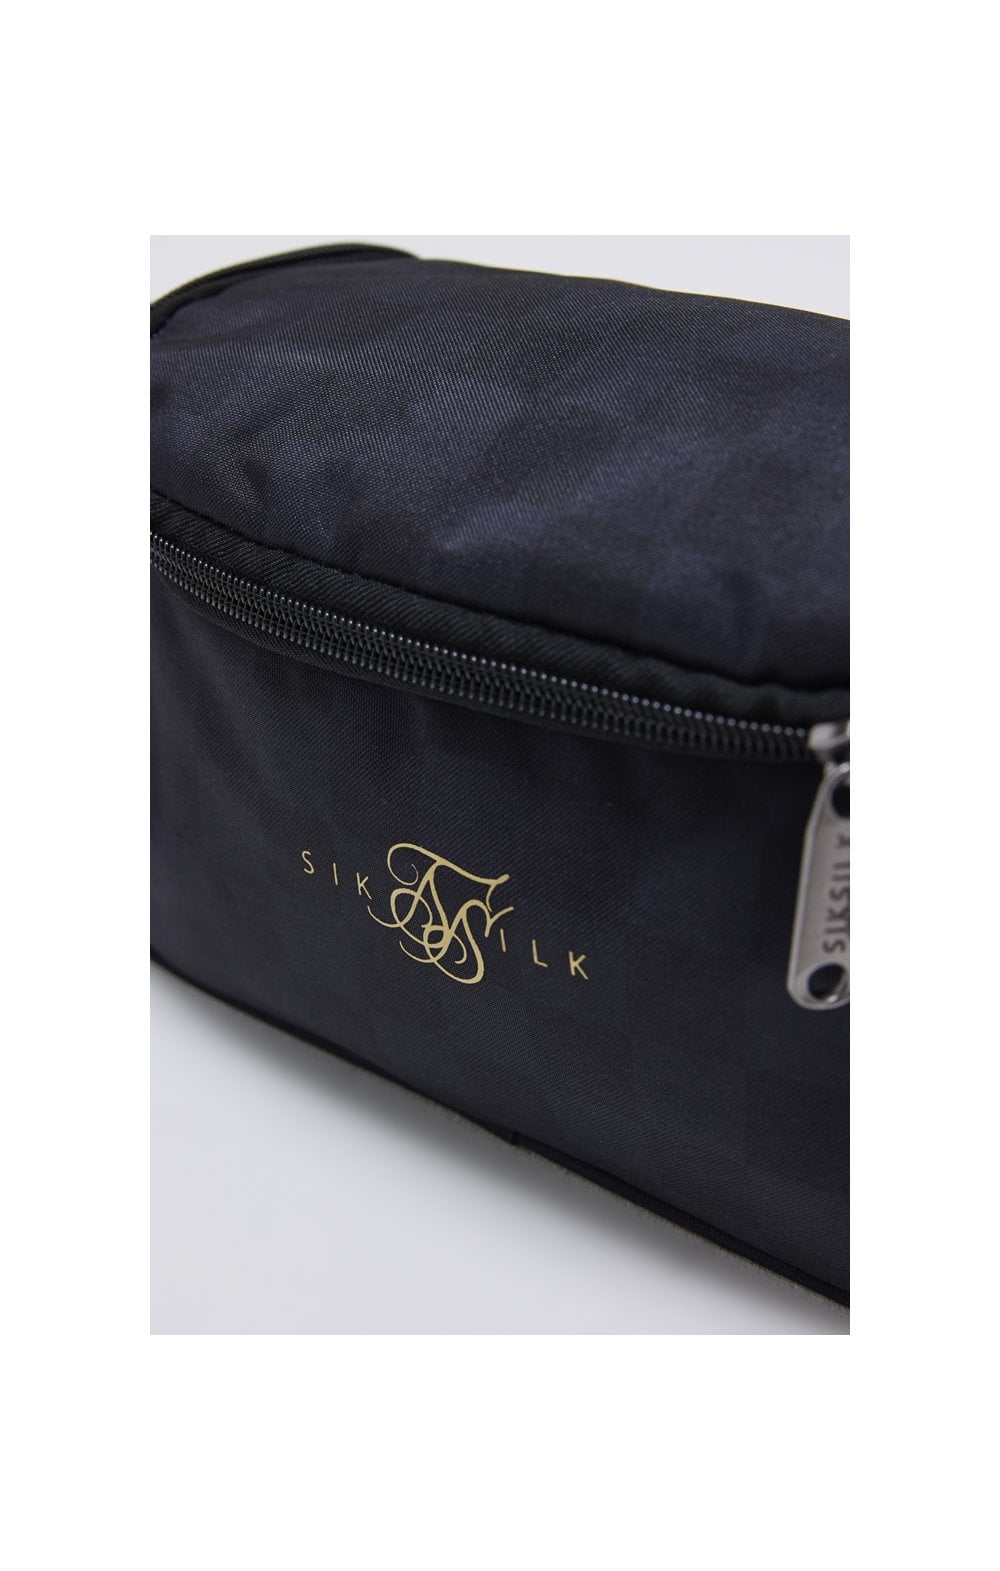 Load image into Gallery viewer, SikSilk Elite Checkered Wash Bag - Black (1)